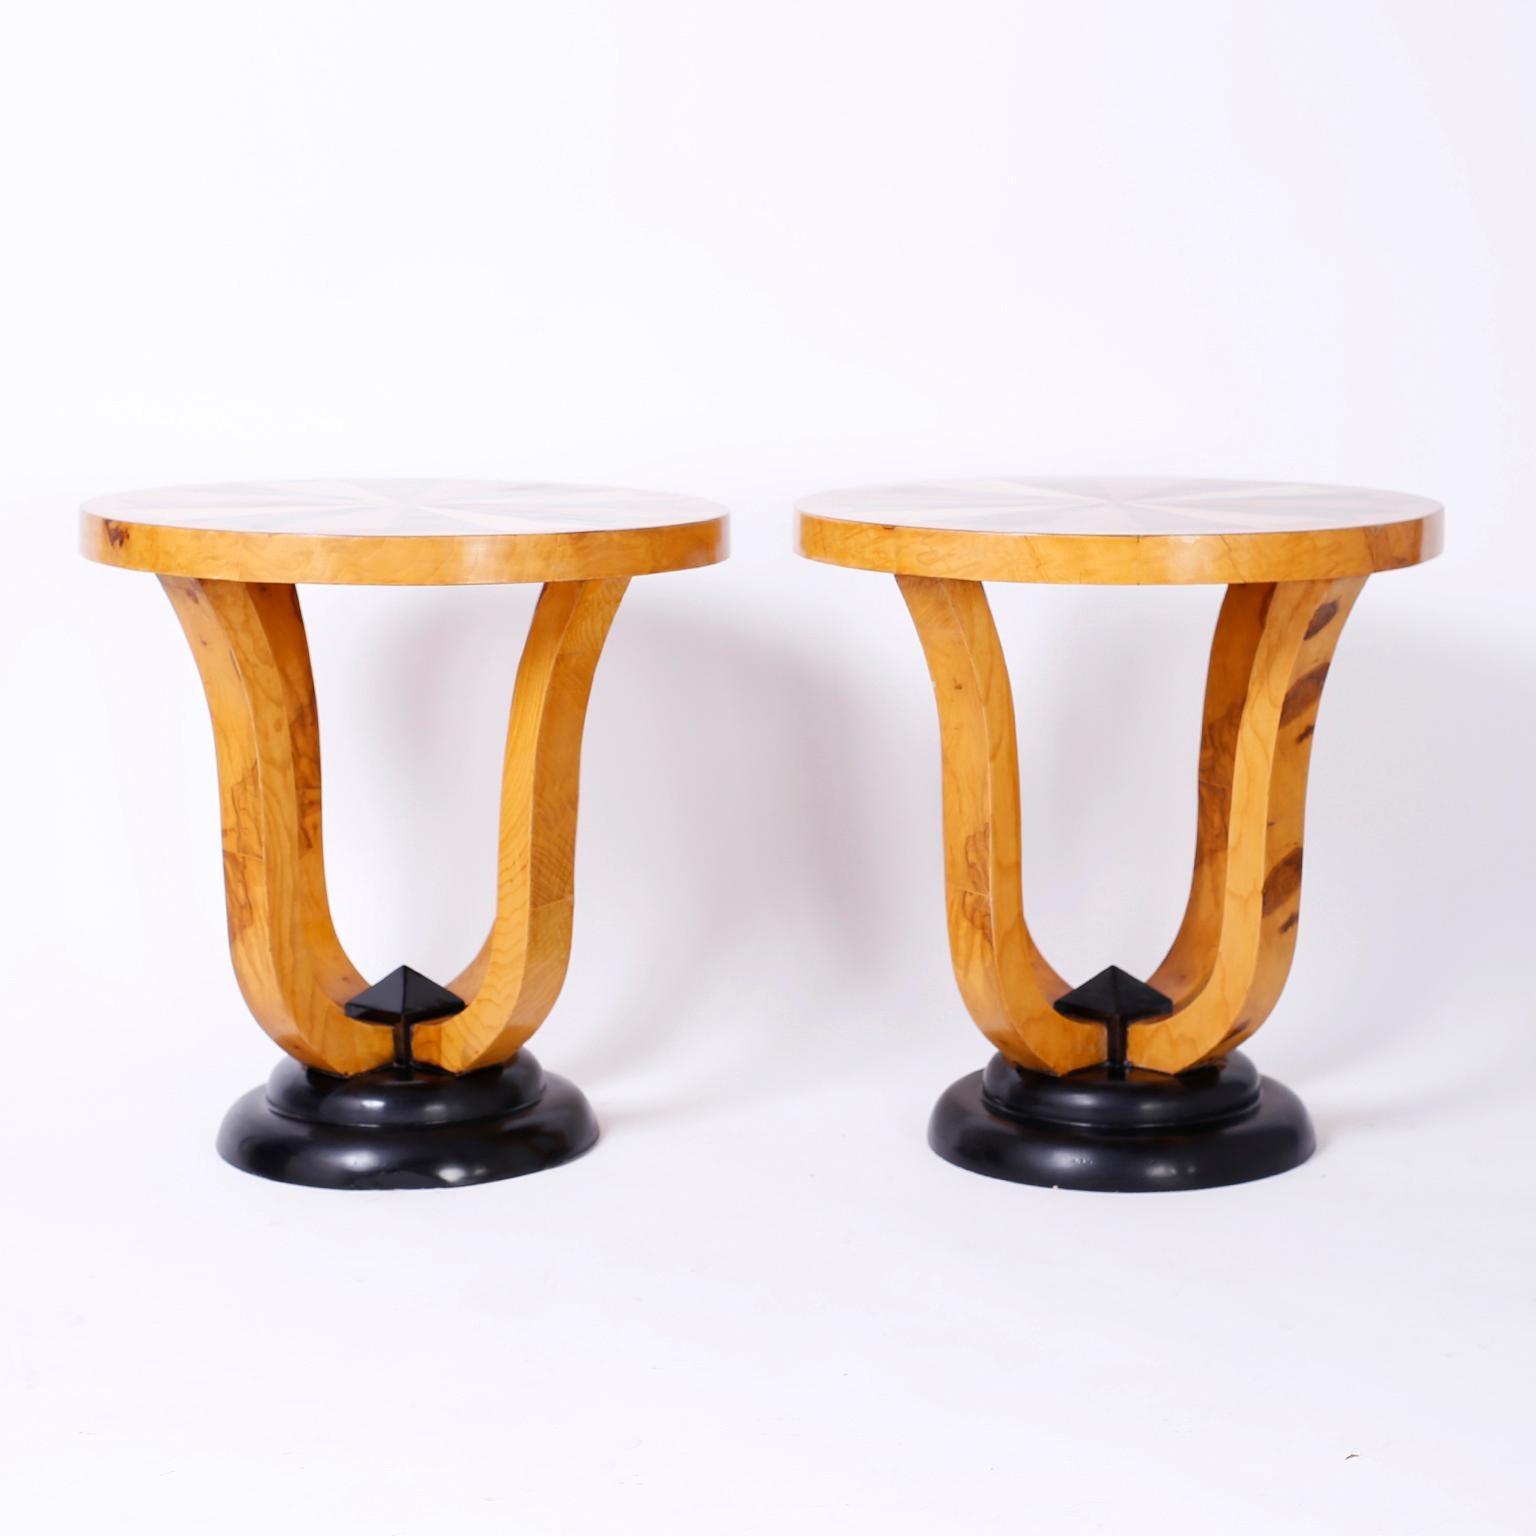 Pair of Art Deco style tables with round tops inlaid with mahogany, birch, pine and zebra wood in a pinwheel design.